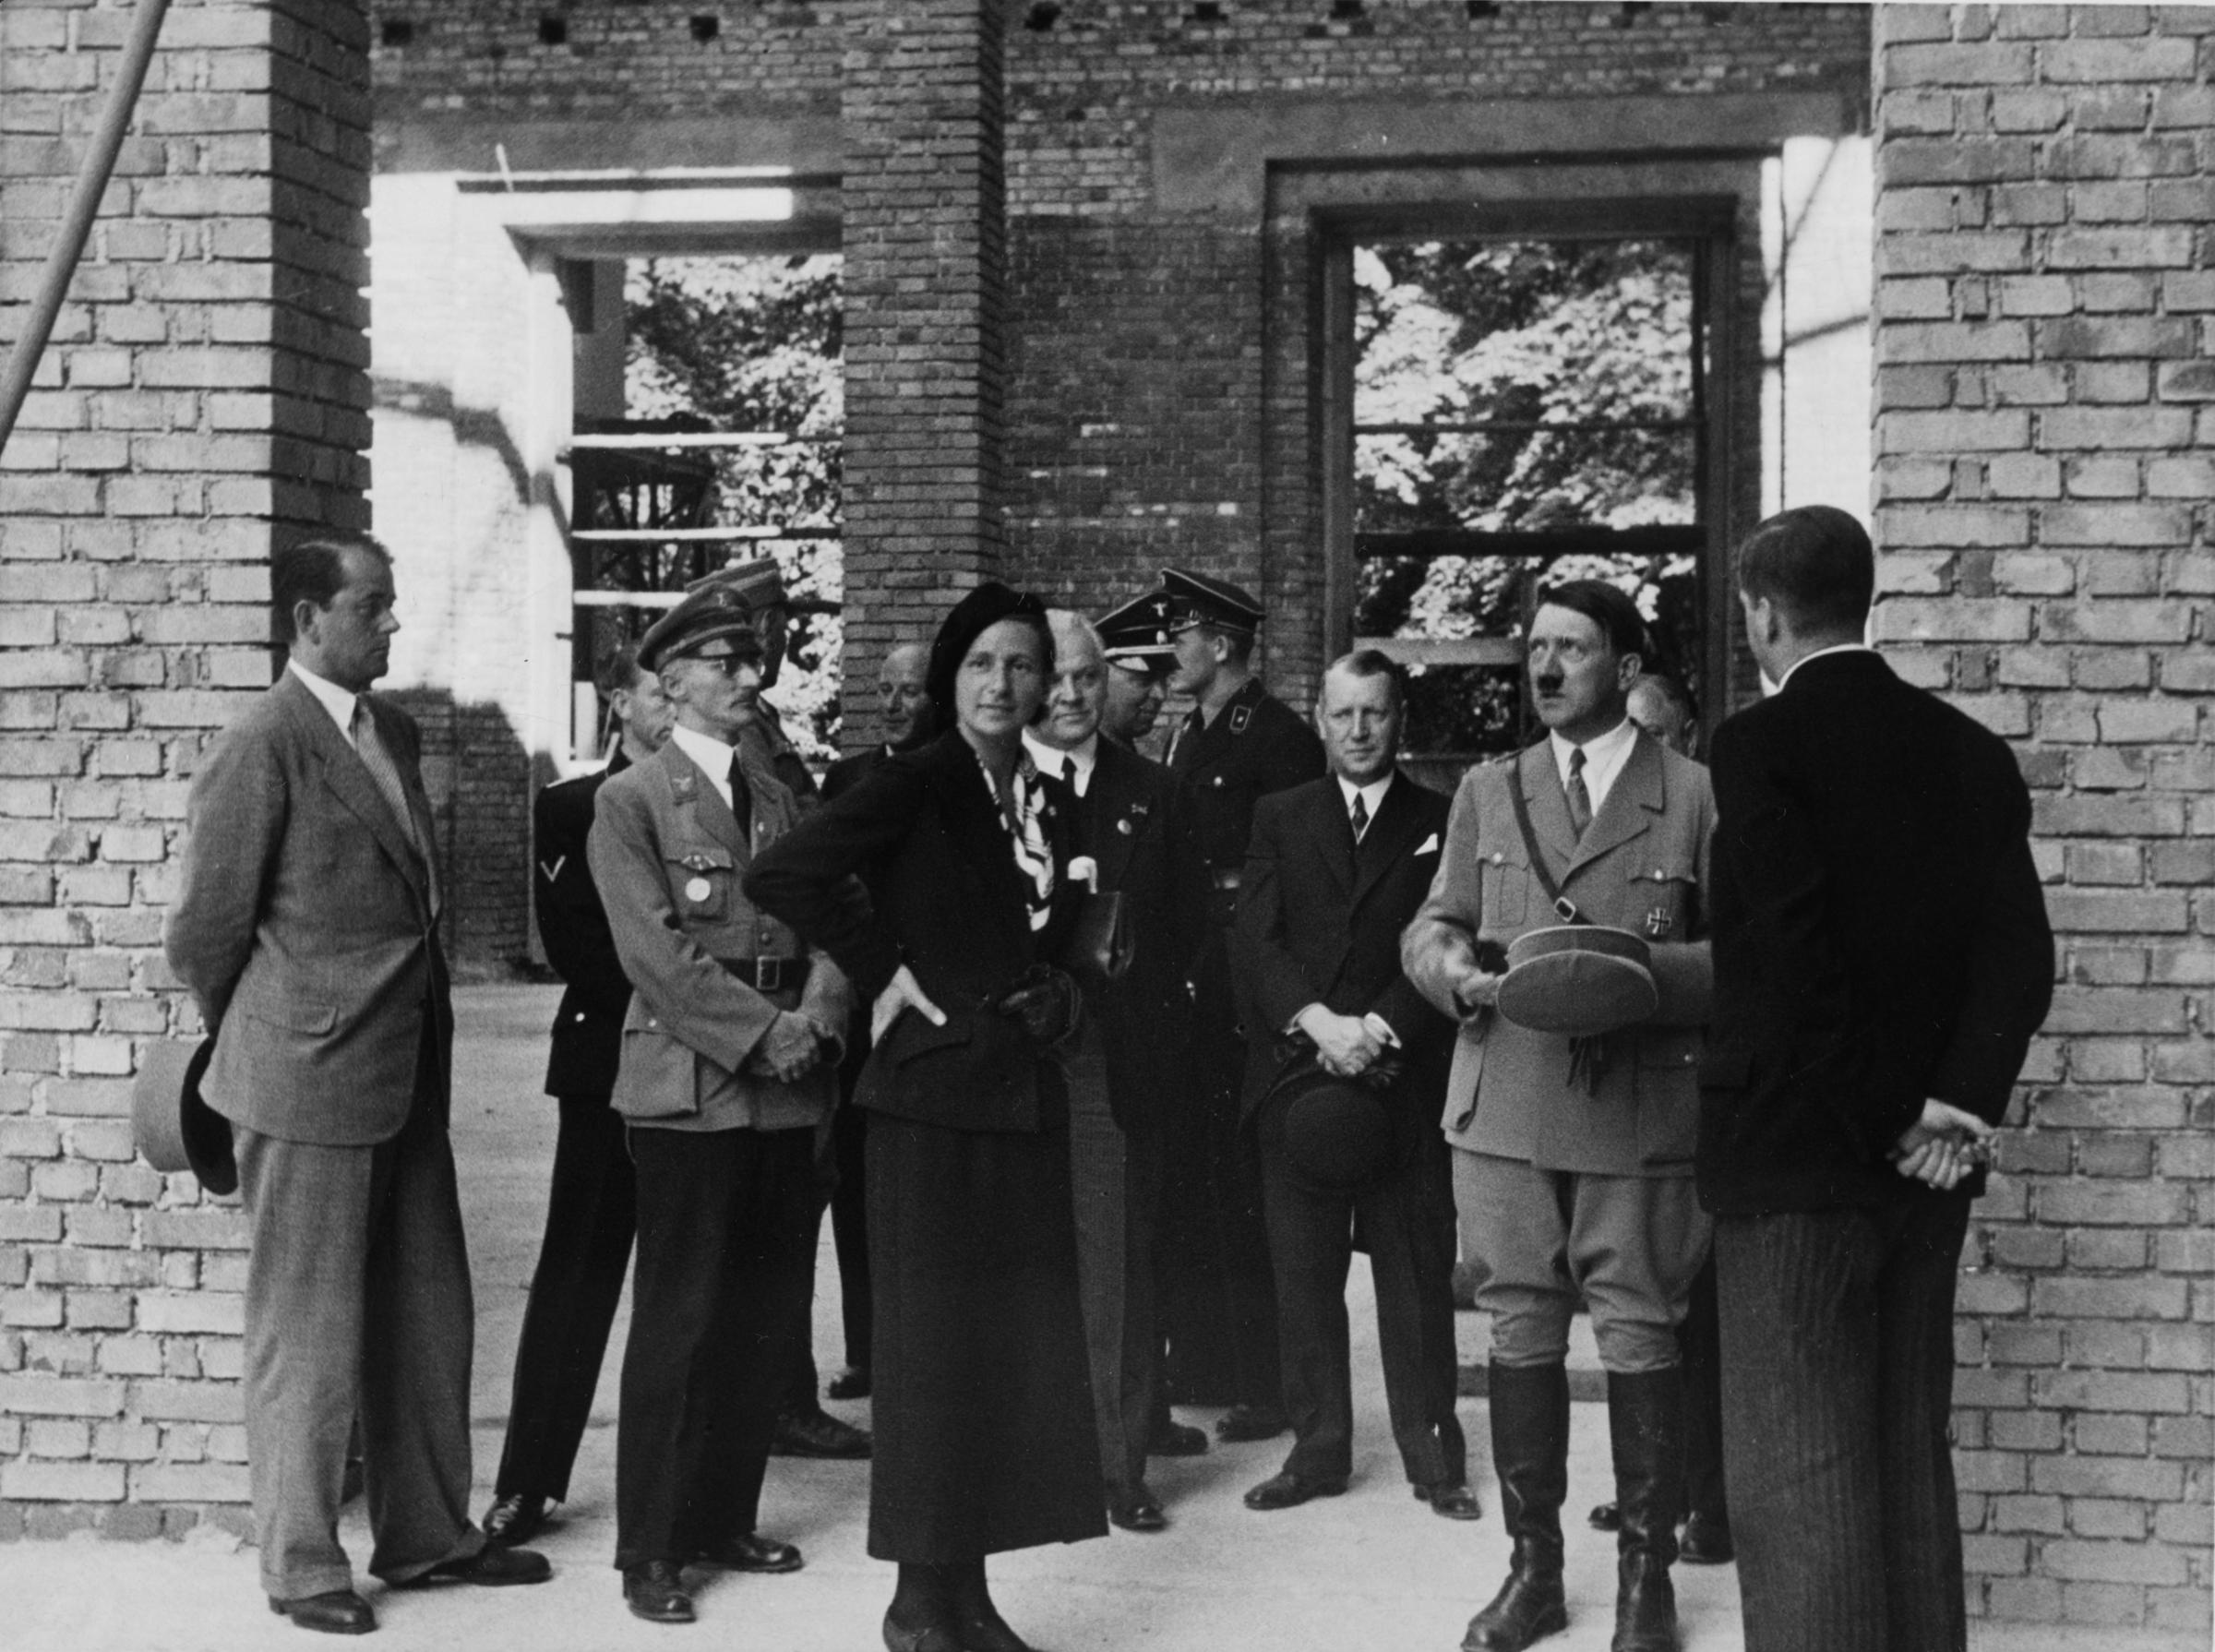 Heinrich Hoffmann, photograph of Albert Speer (far left), Gerdy Troost, Hitler, and others inspecting the House of German Art construction site in Munich on June 29, 1935, on the occasion of the topping-out ceremony.